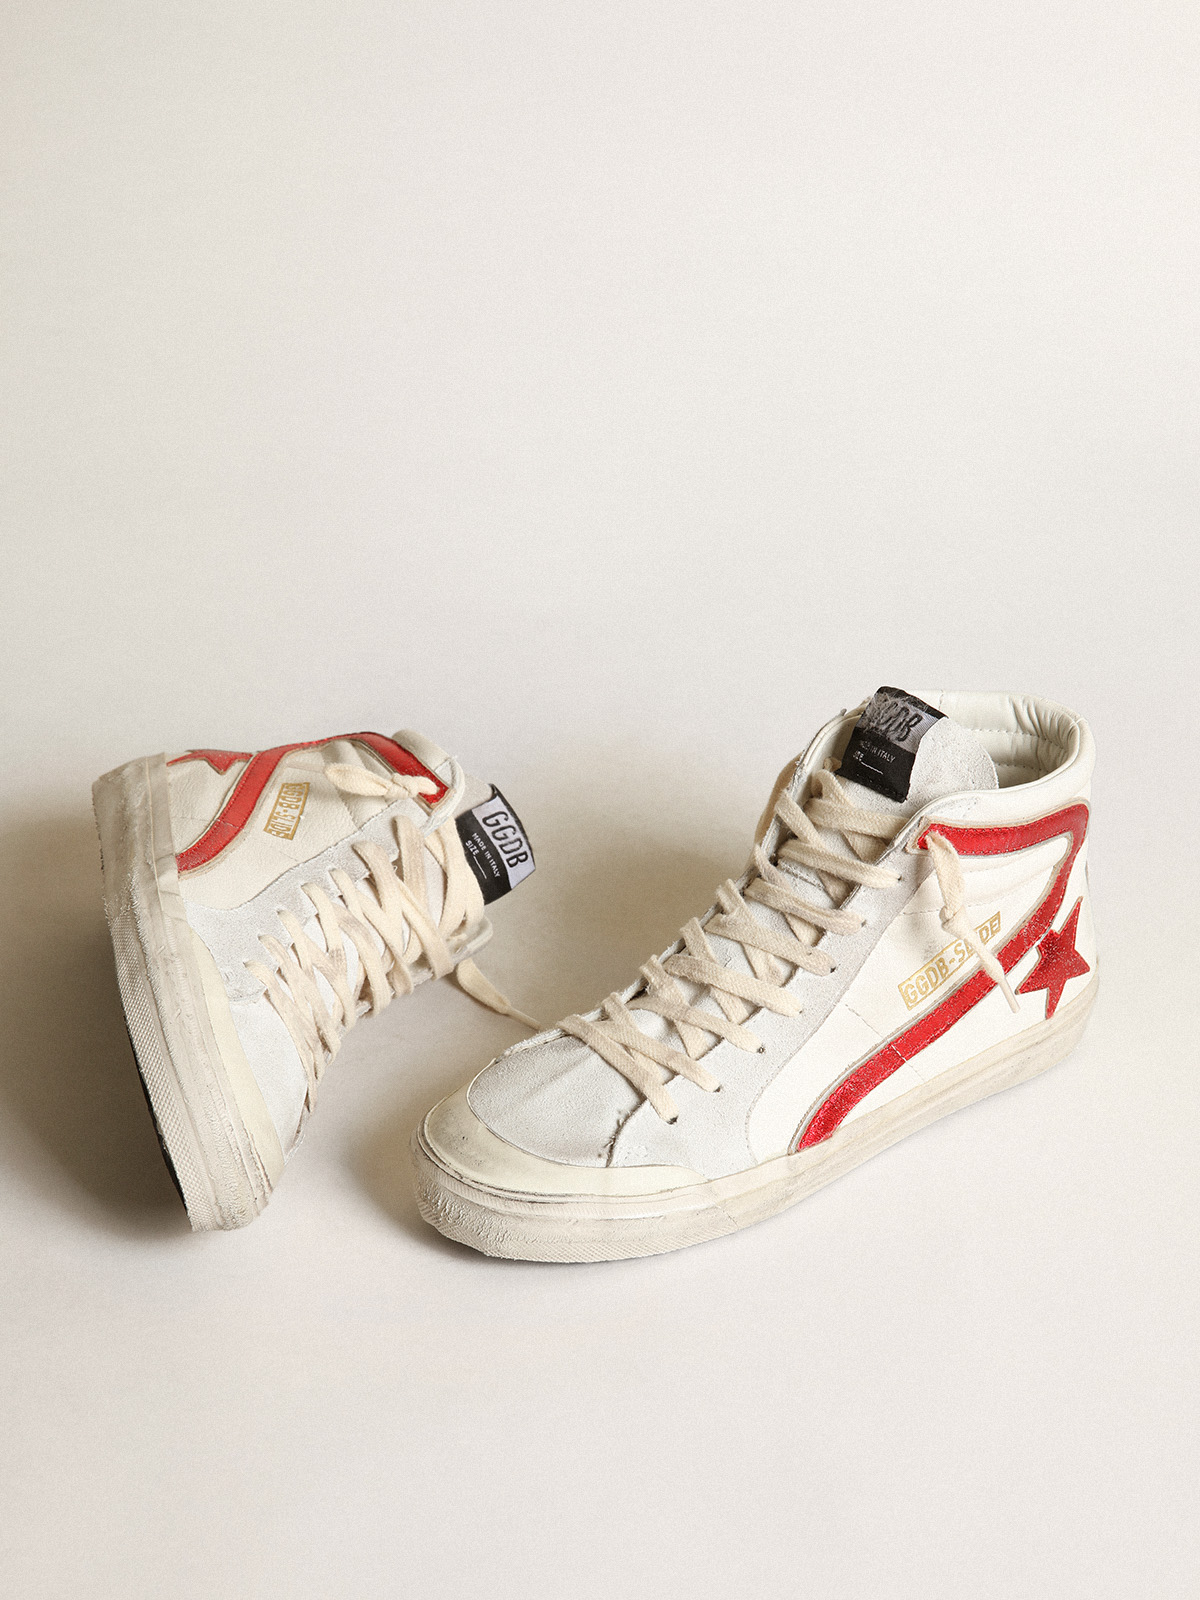 Slide with a red laminated leather star and flash | Golden Goose